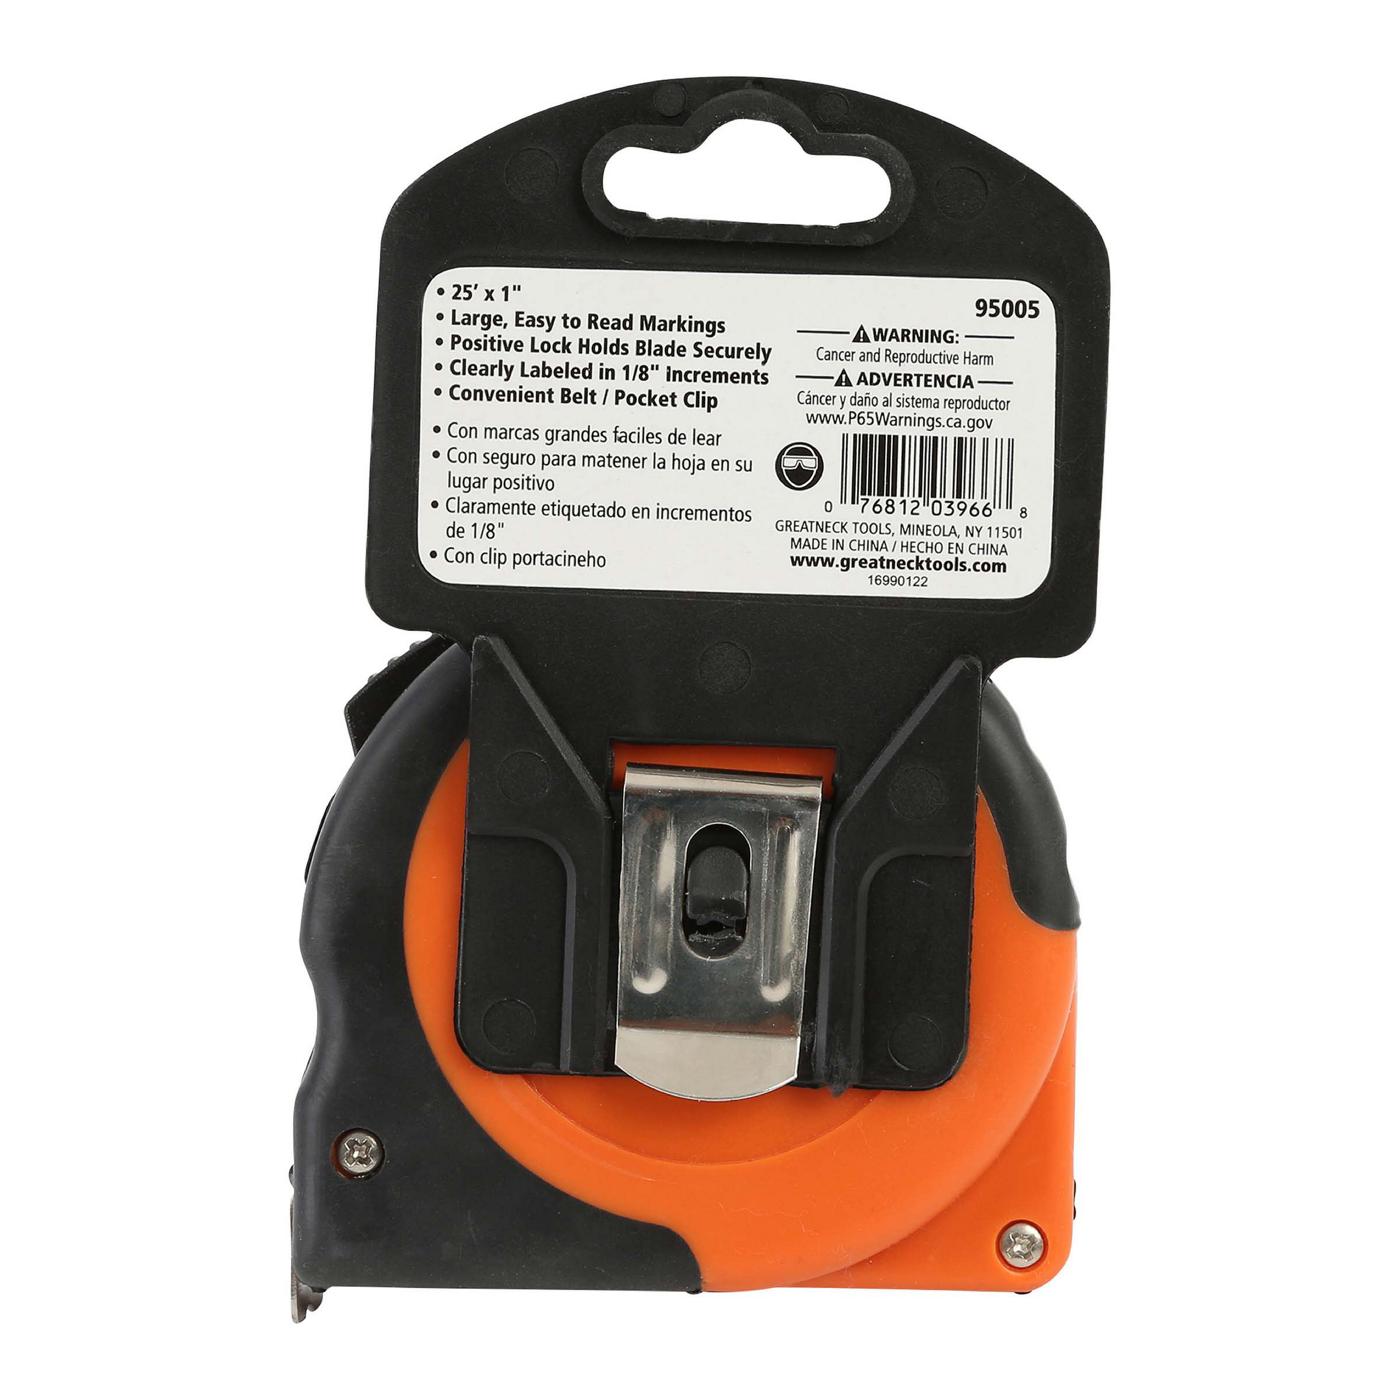 Singer Sewing Retractable Tape Measure - Shop Sewing at H-E-B